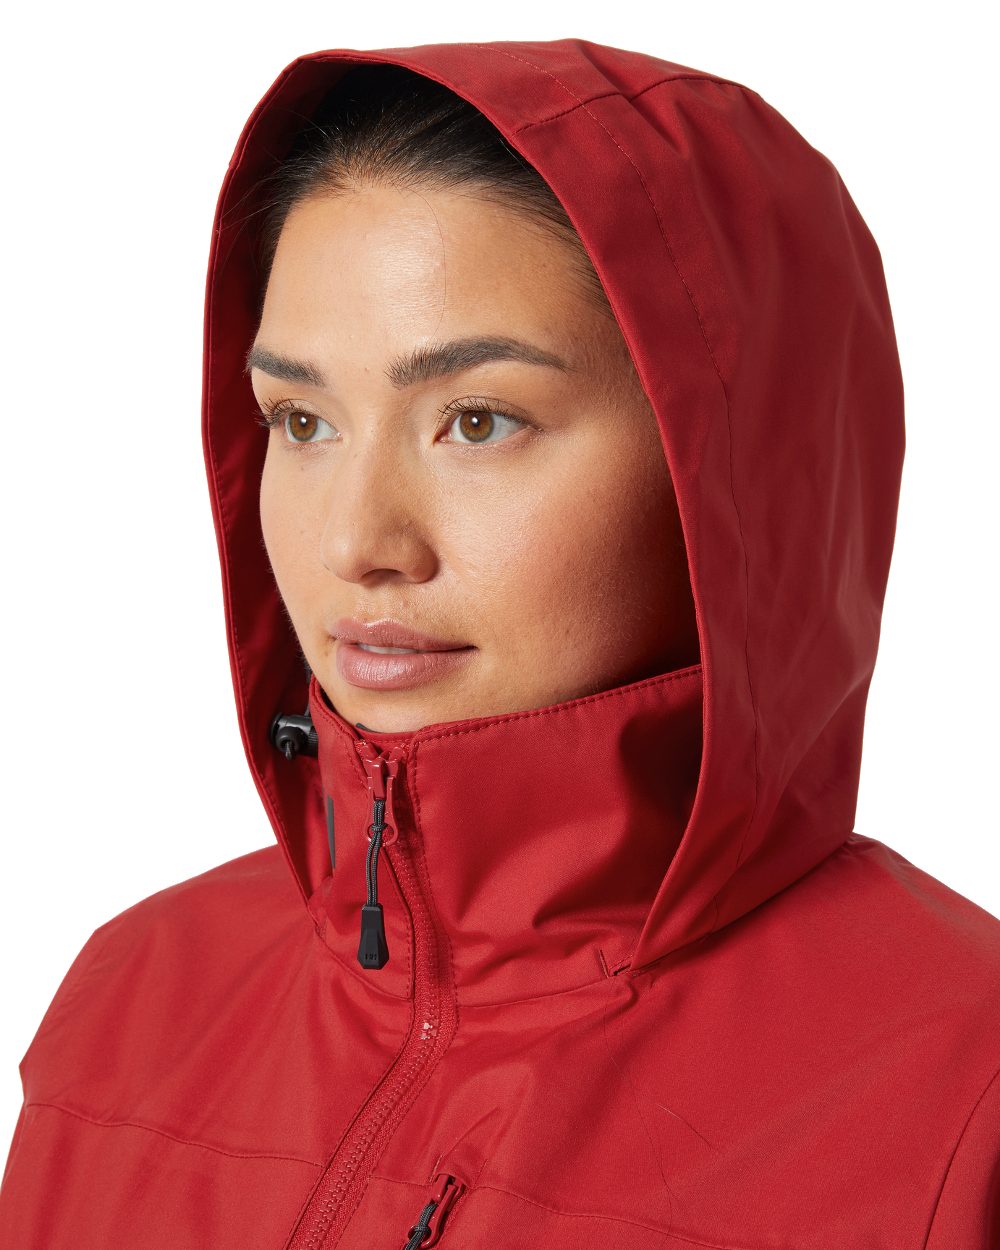 Red coloured Helly Hansen womens crew hooded sailing jacket 2.0 on white background 